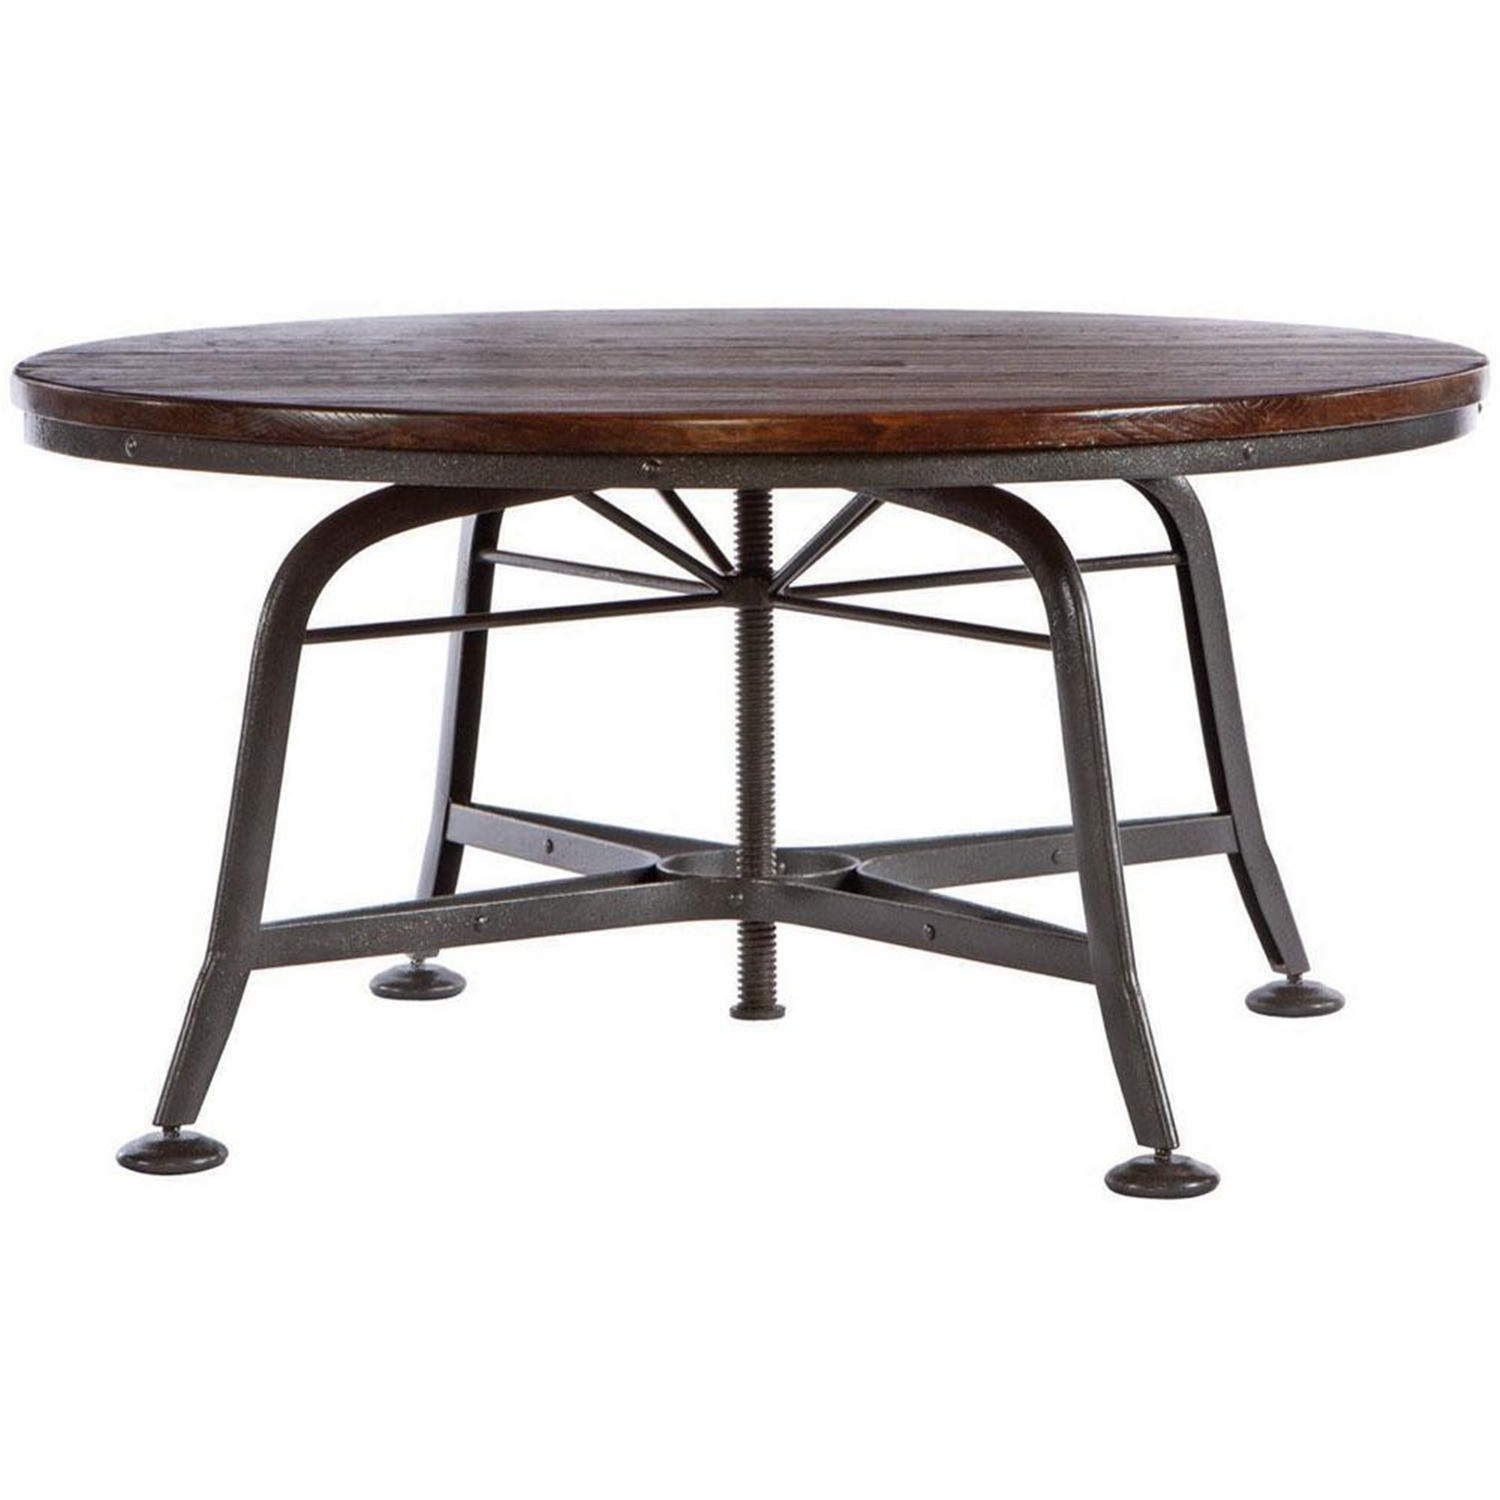 Adjustable height coffee dining table 229 97